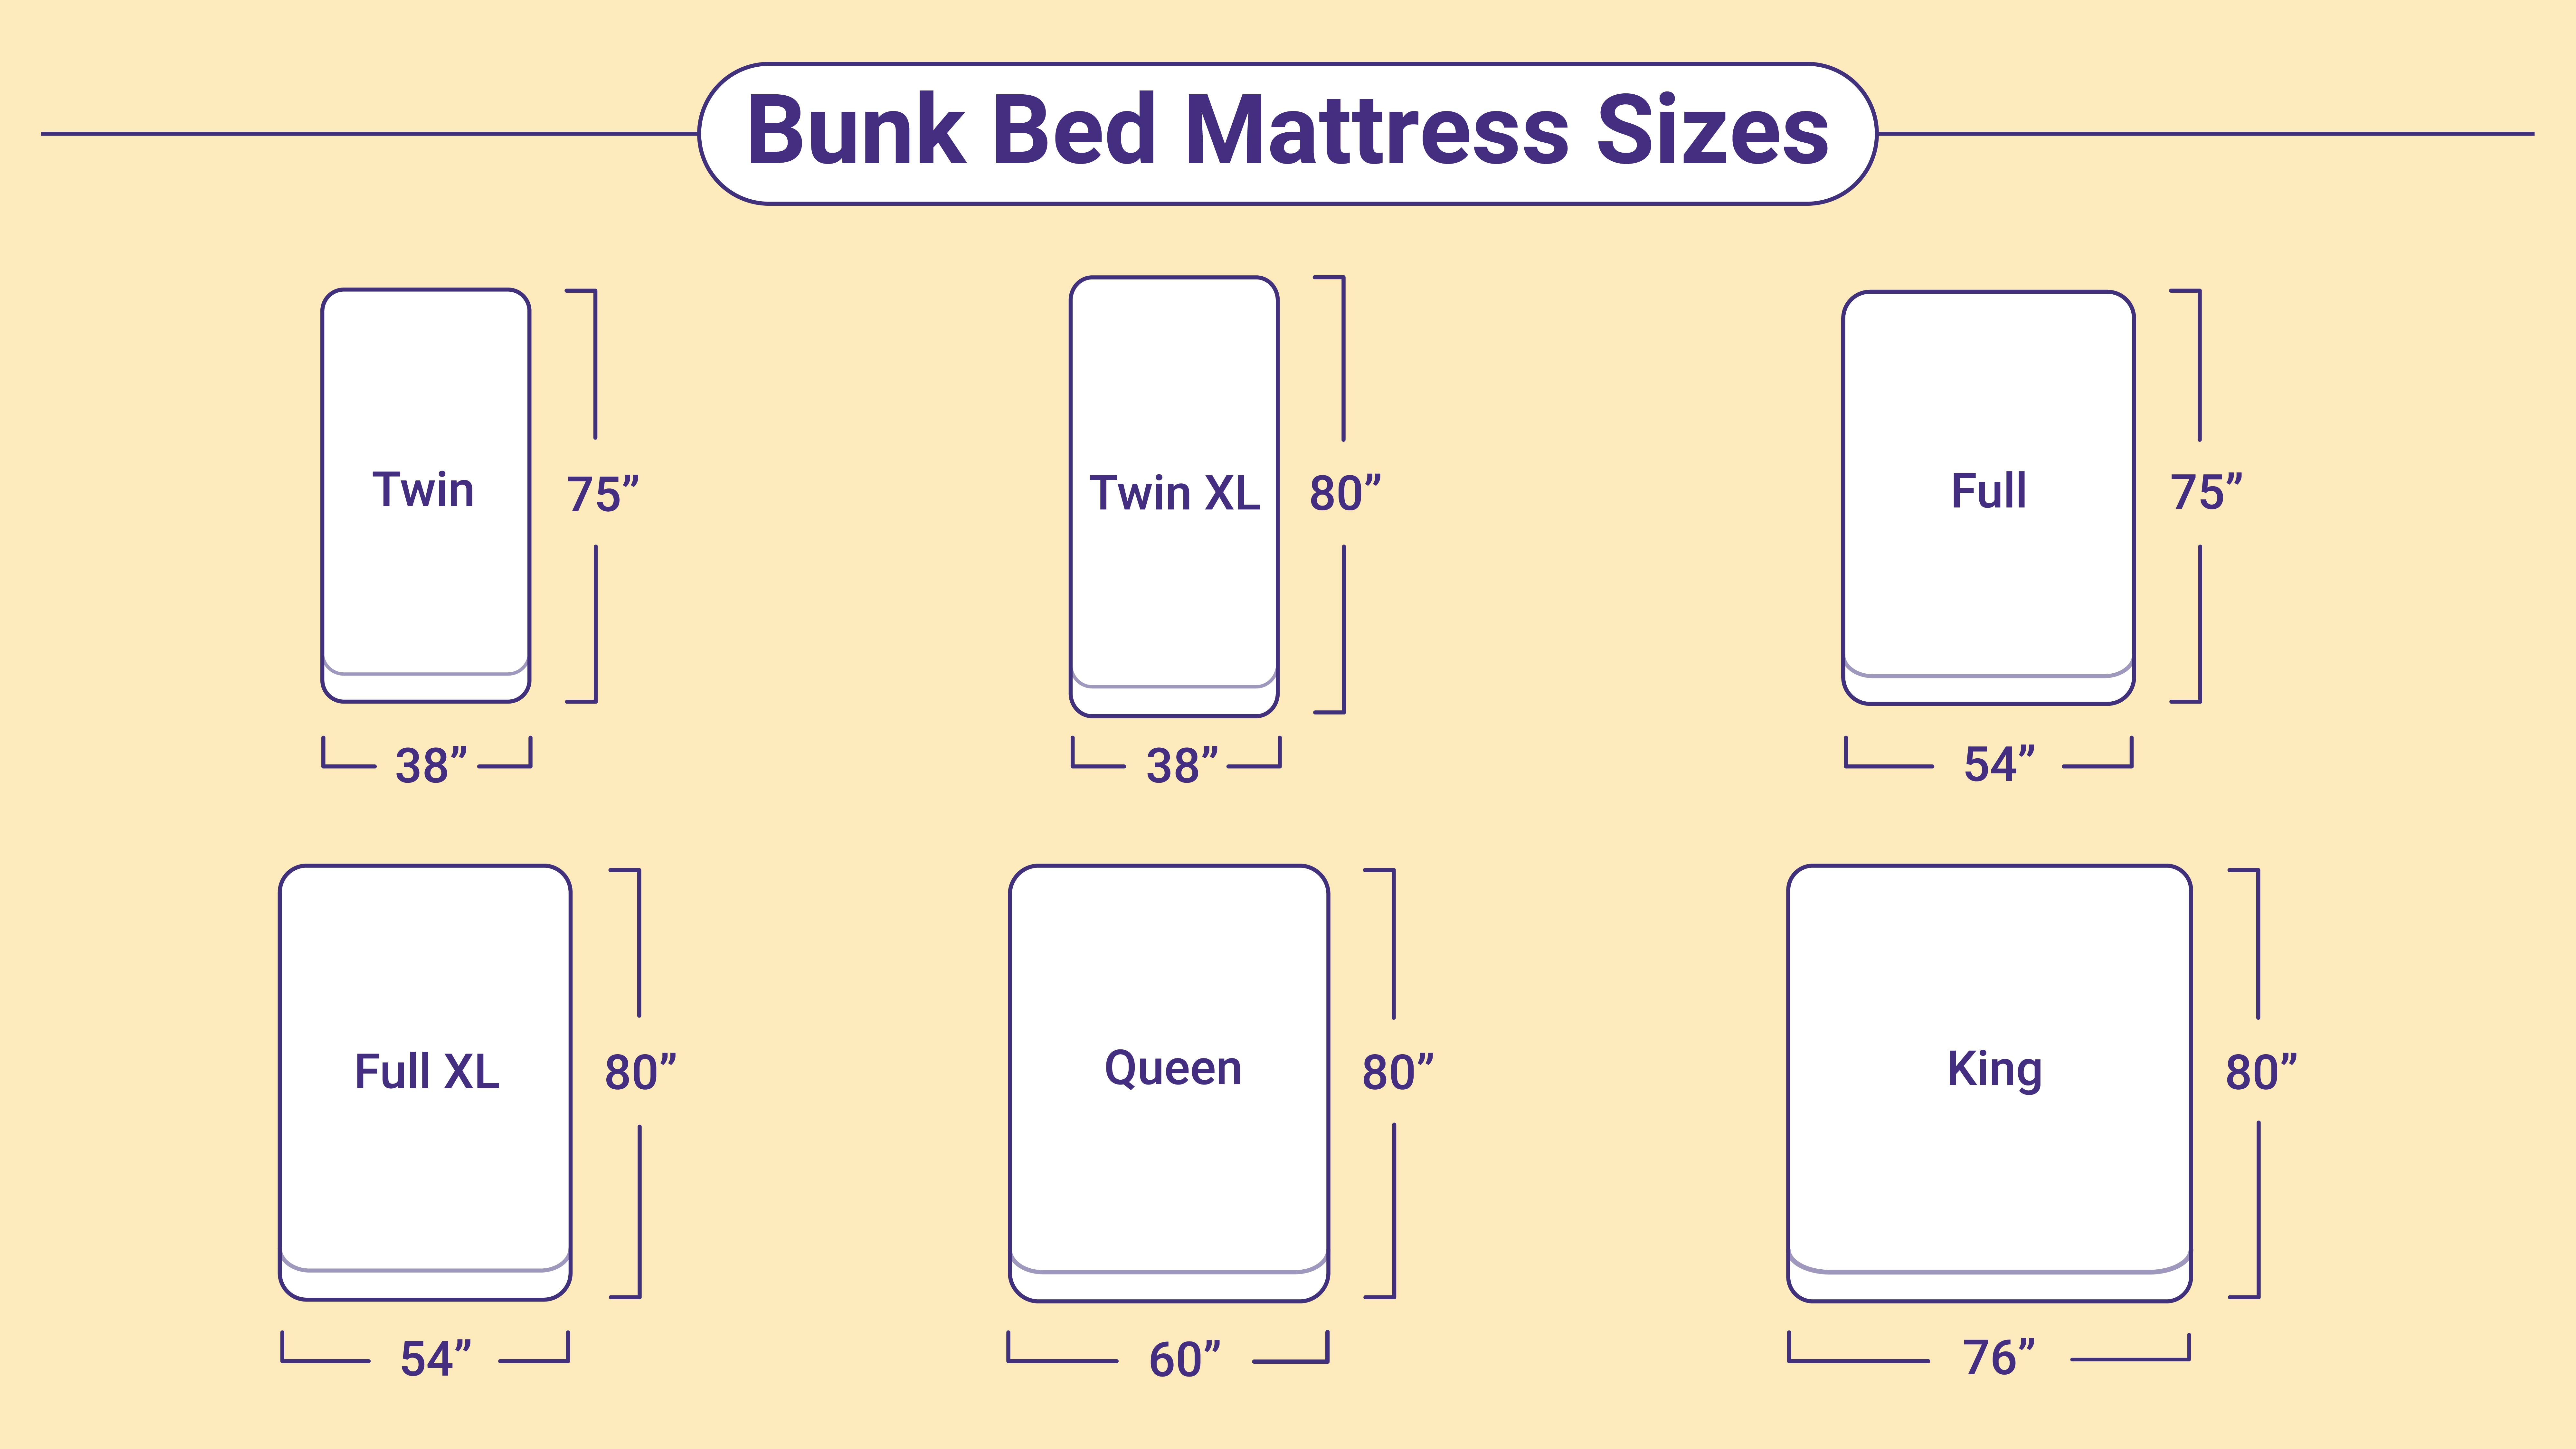 Bunk Bed Mattress Sizes And Dimensions, Width Of Extra Long Twin Bed